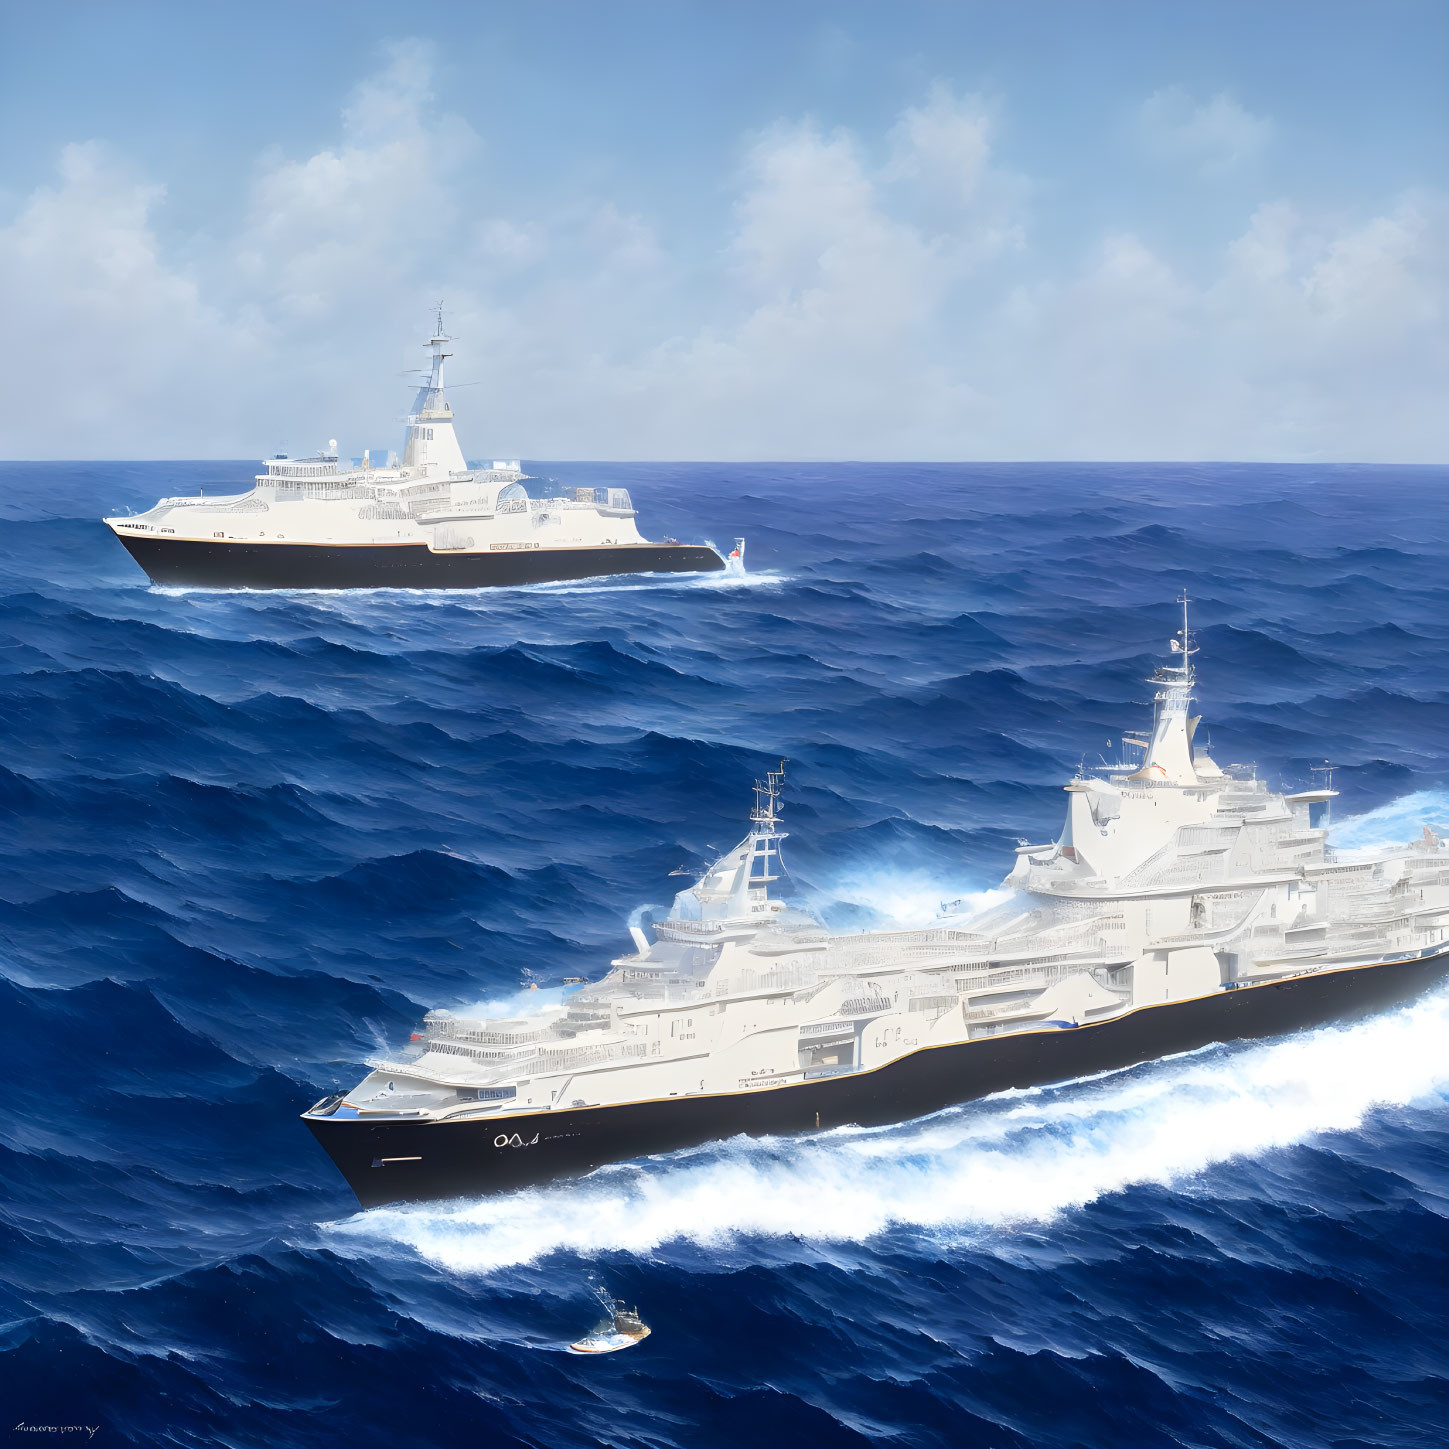 Modern naval warships on bright blue ocean with white waves and partly cloudy sky